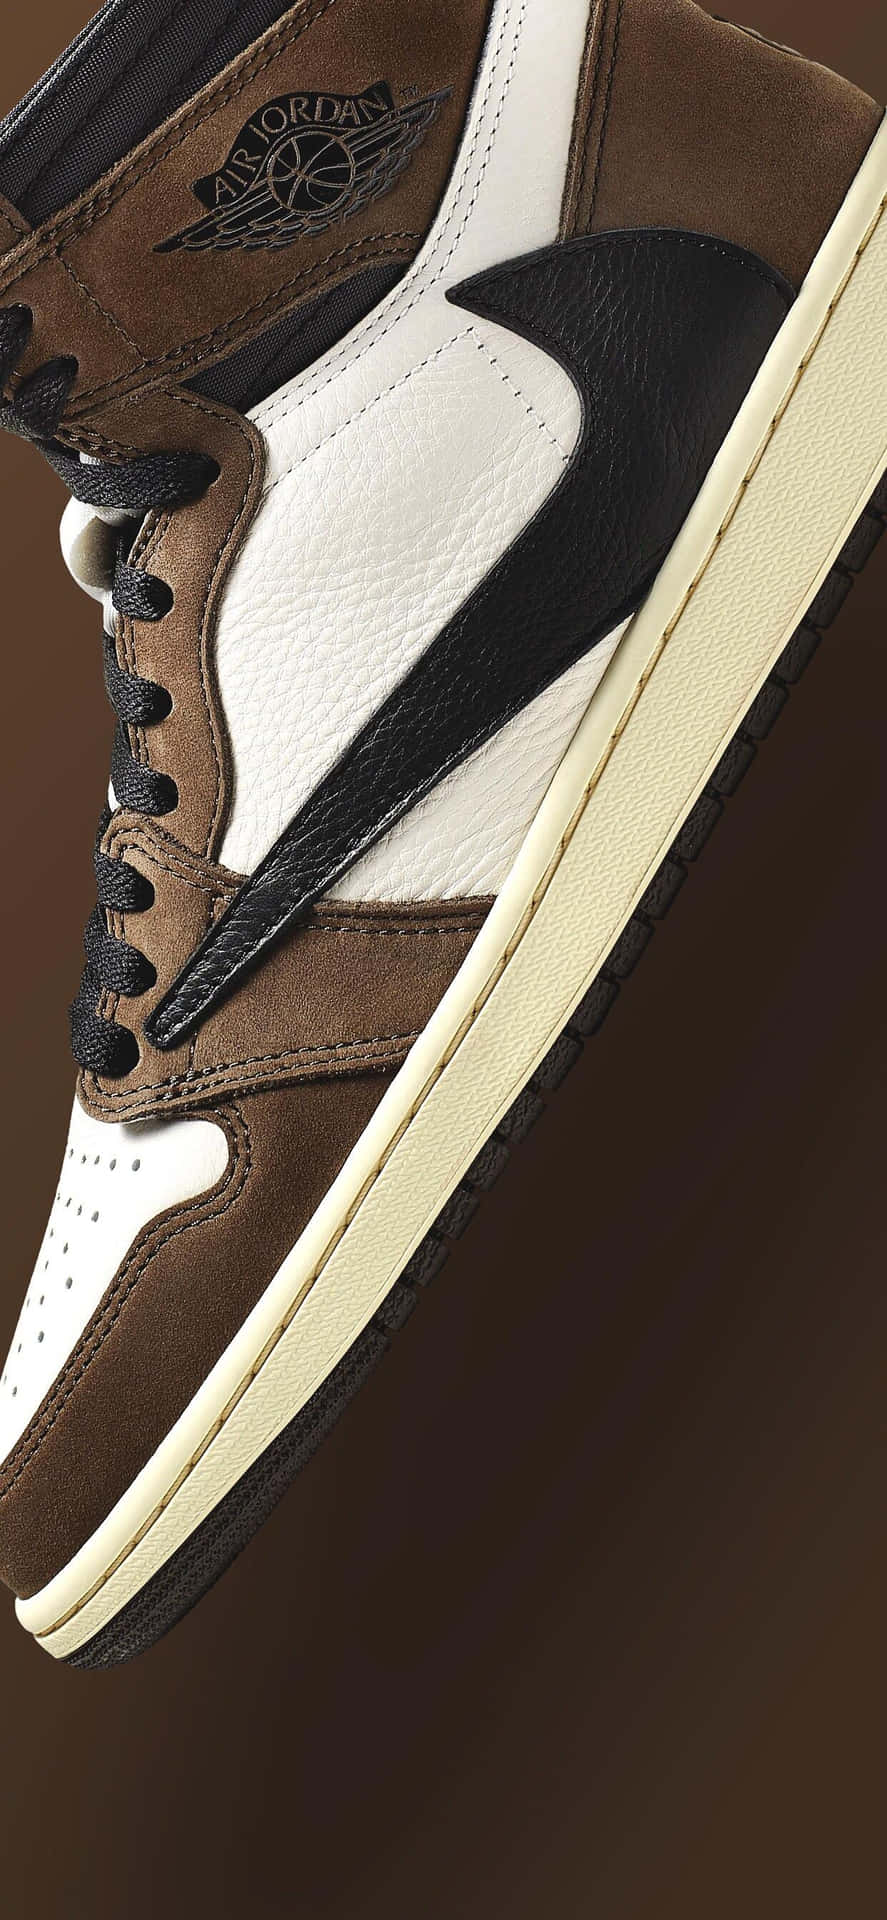 Iconic style and comfort come together in the Travis Scott x Air Jordan 1. Wallpaper